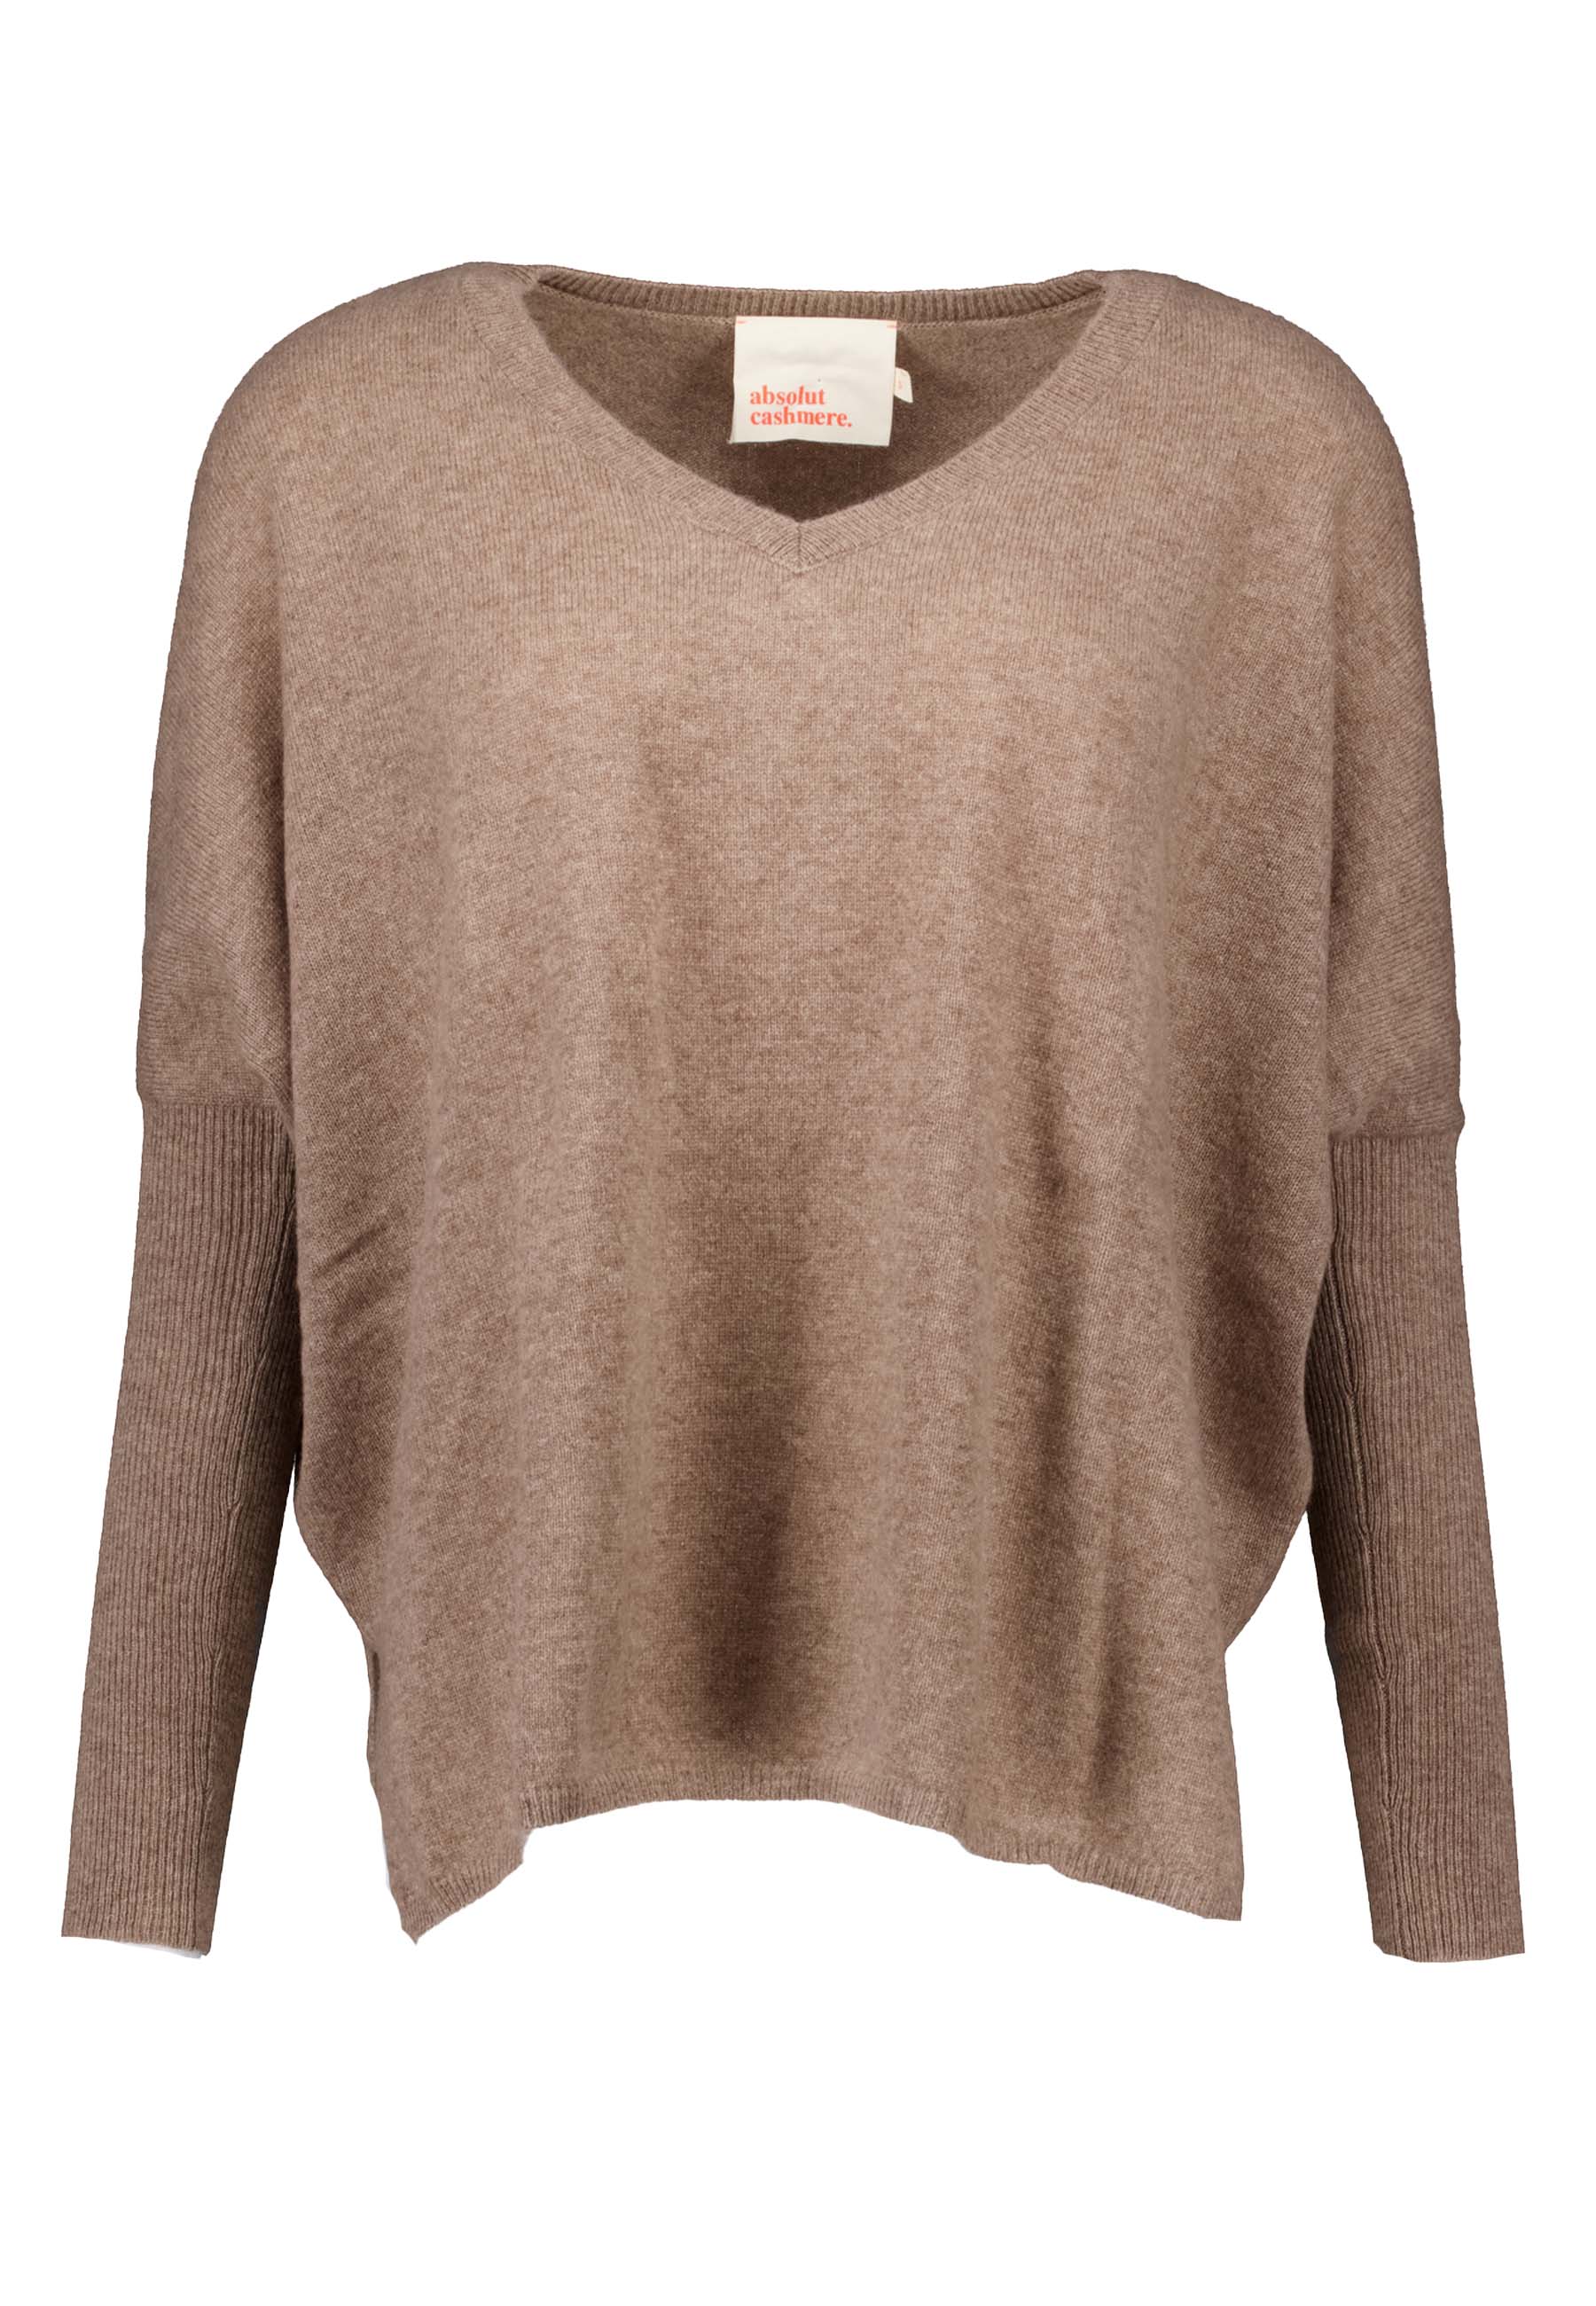 Absolut Cashmere truien taupe Dames maat M